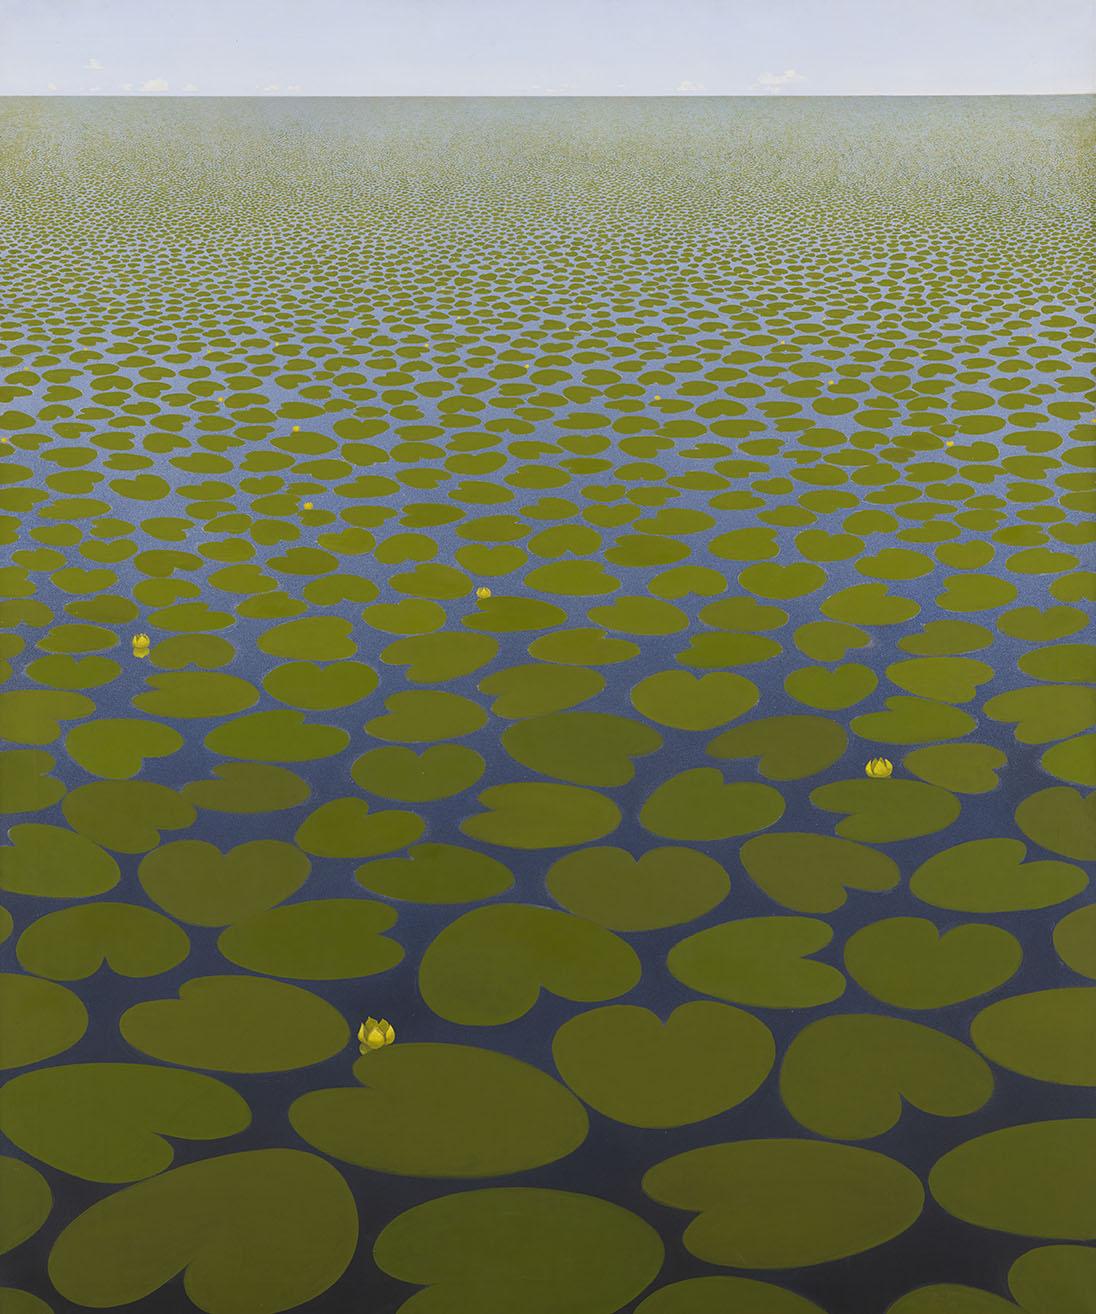 A painting of green lily pads on the surface of water that extends endlessly into the horizon.